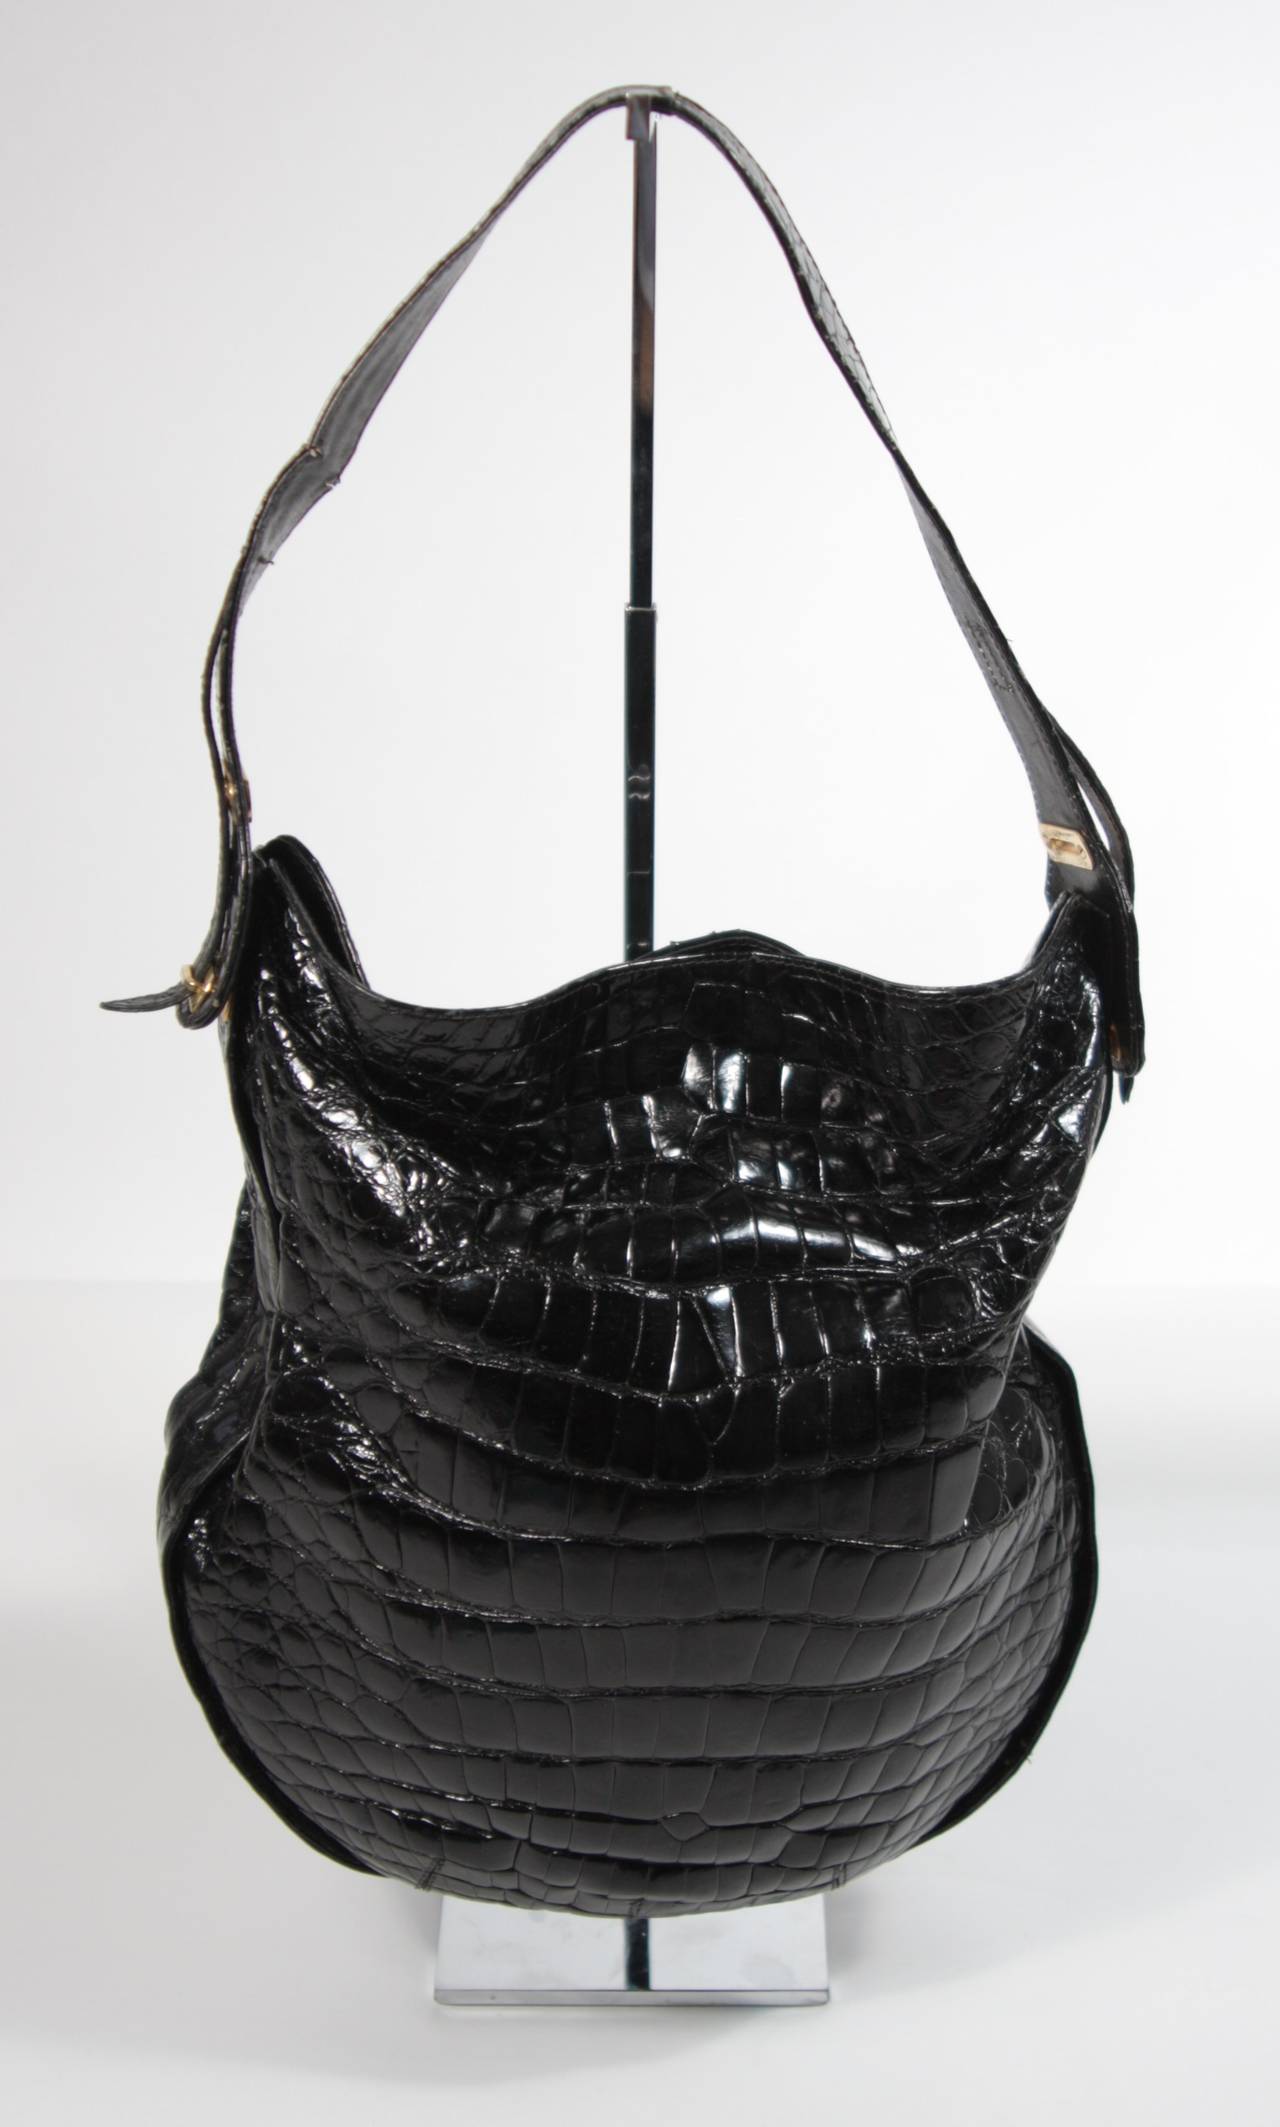 This Charles Jourdan handbag is available for viewing at our Beverly Hills Boutique. We offer a large selection of evening gowns and luxury garments.

This handbag is composed of a black Crocodile and features gold hardware. The strap has an